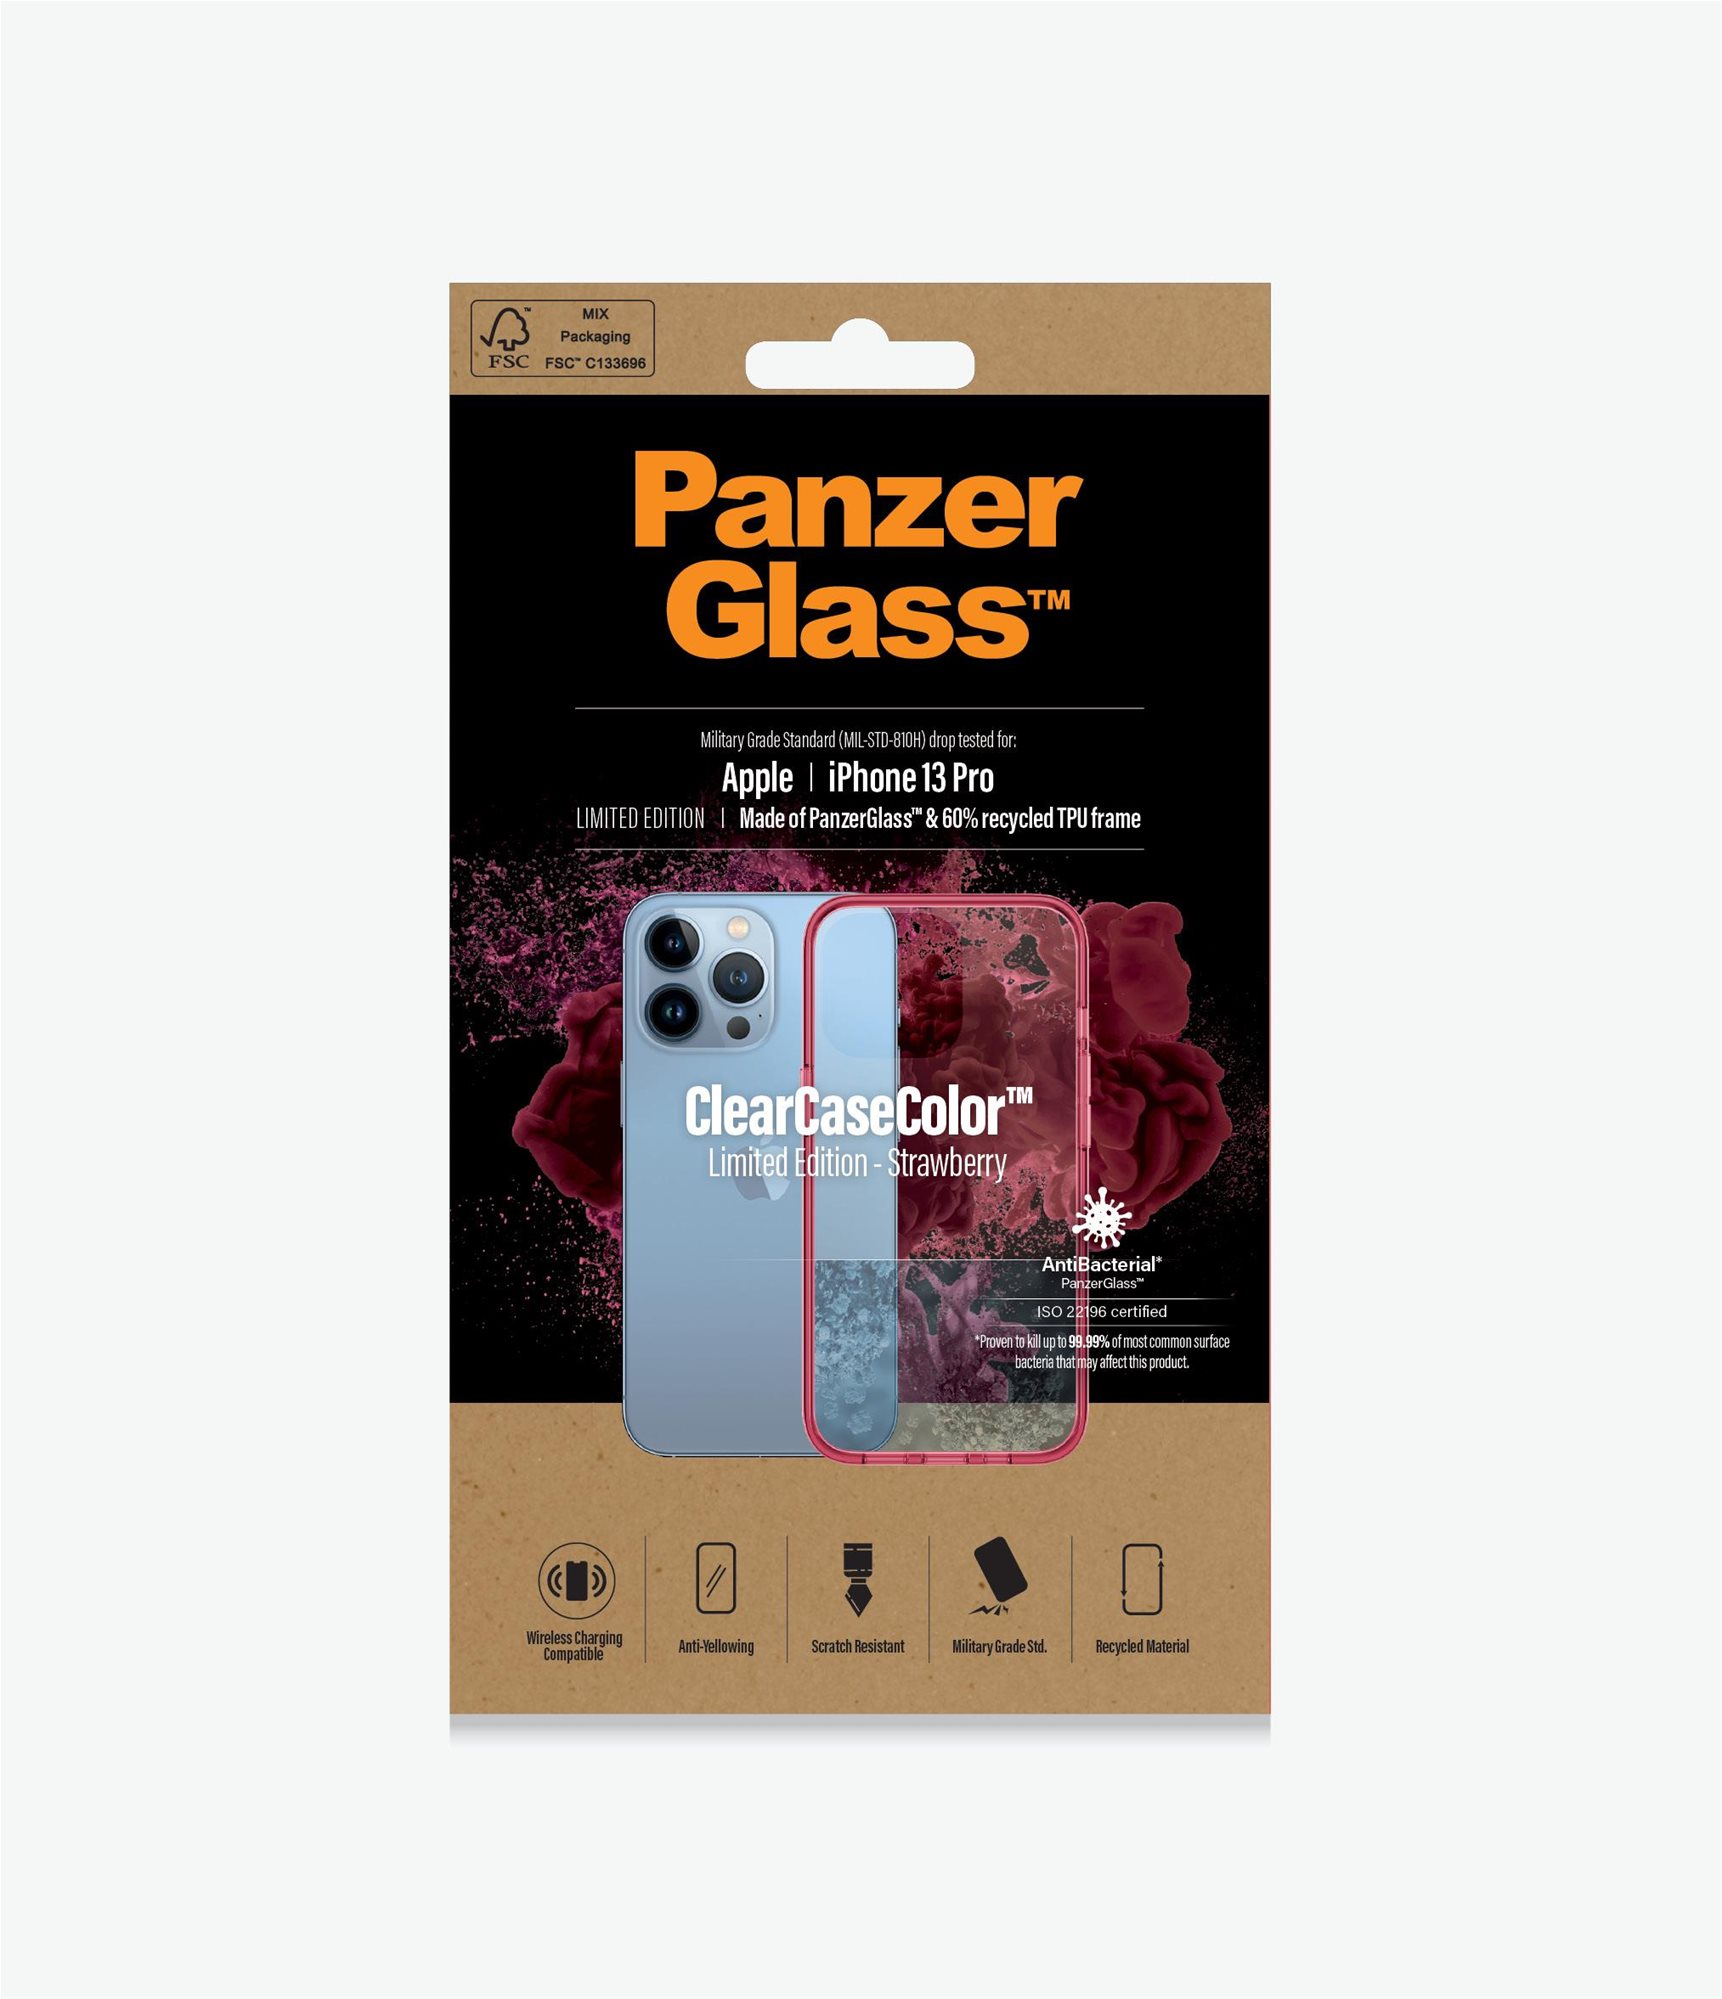 PanzerGlass ClearCaseColor Apple iPhone 13 Pro (piros - Strawberry)